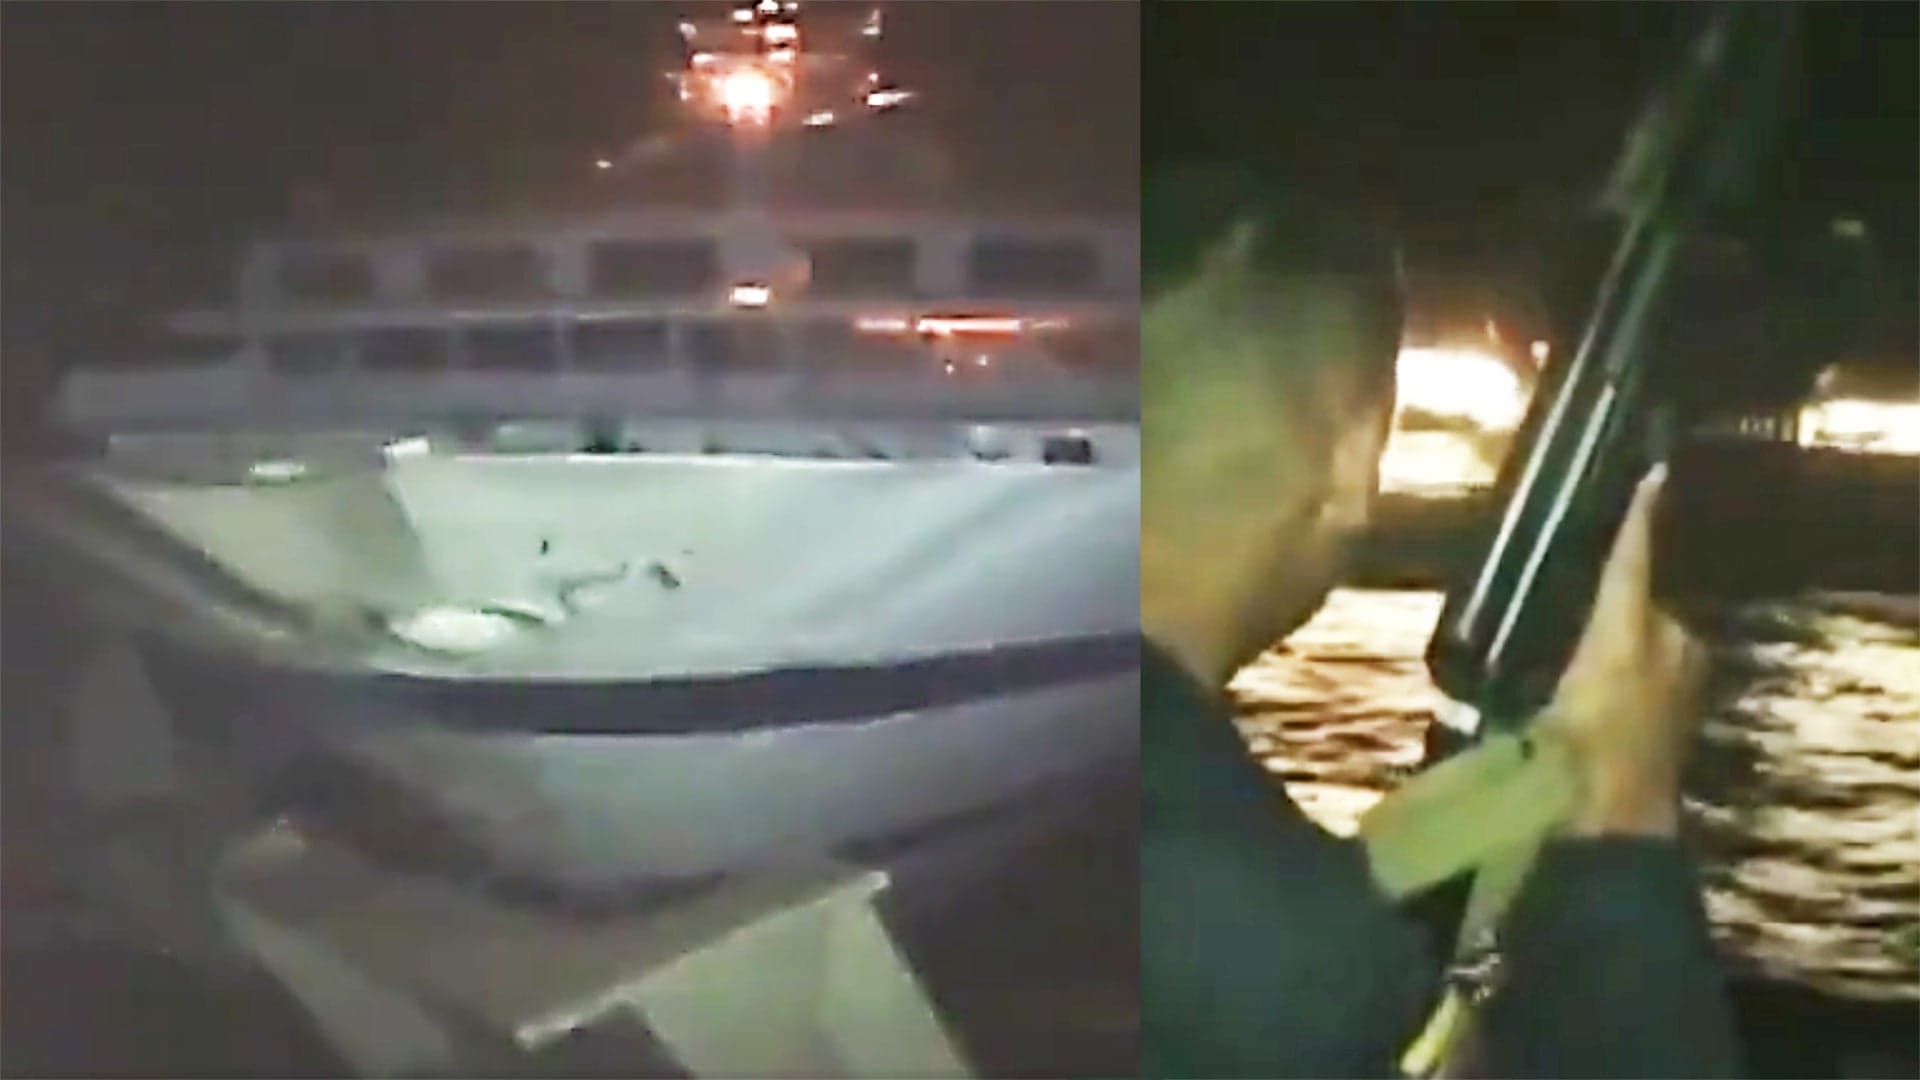 Video Emerges Of Venezuelan Navy Ship Firing On And Colliding With Cruise Ship Before Sinking